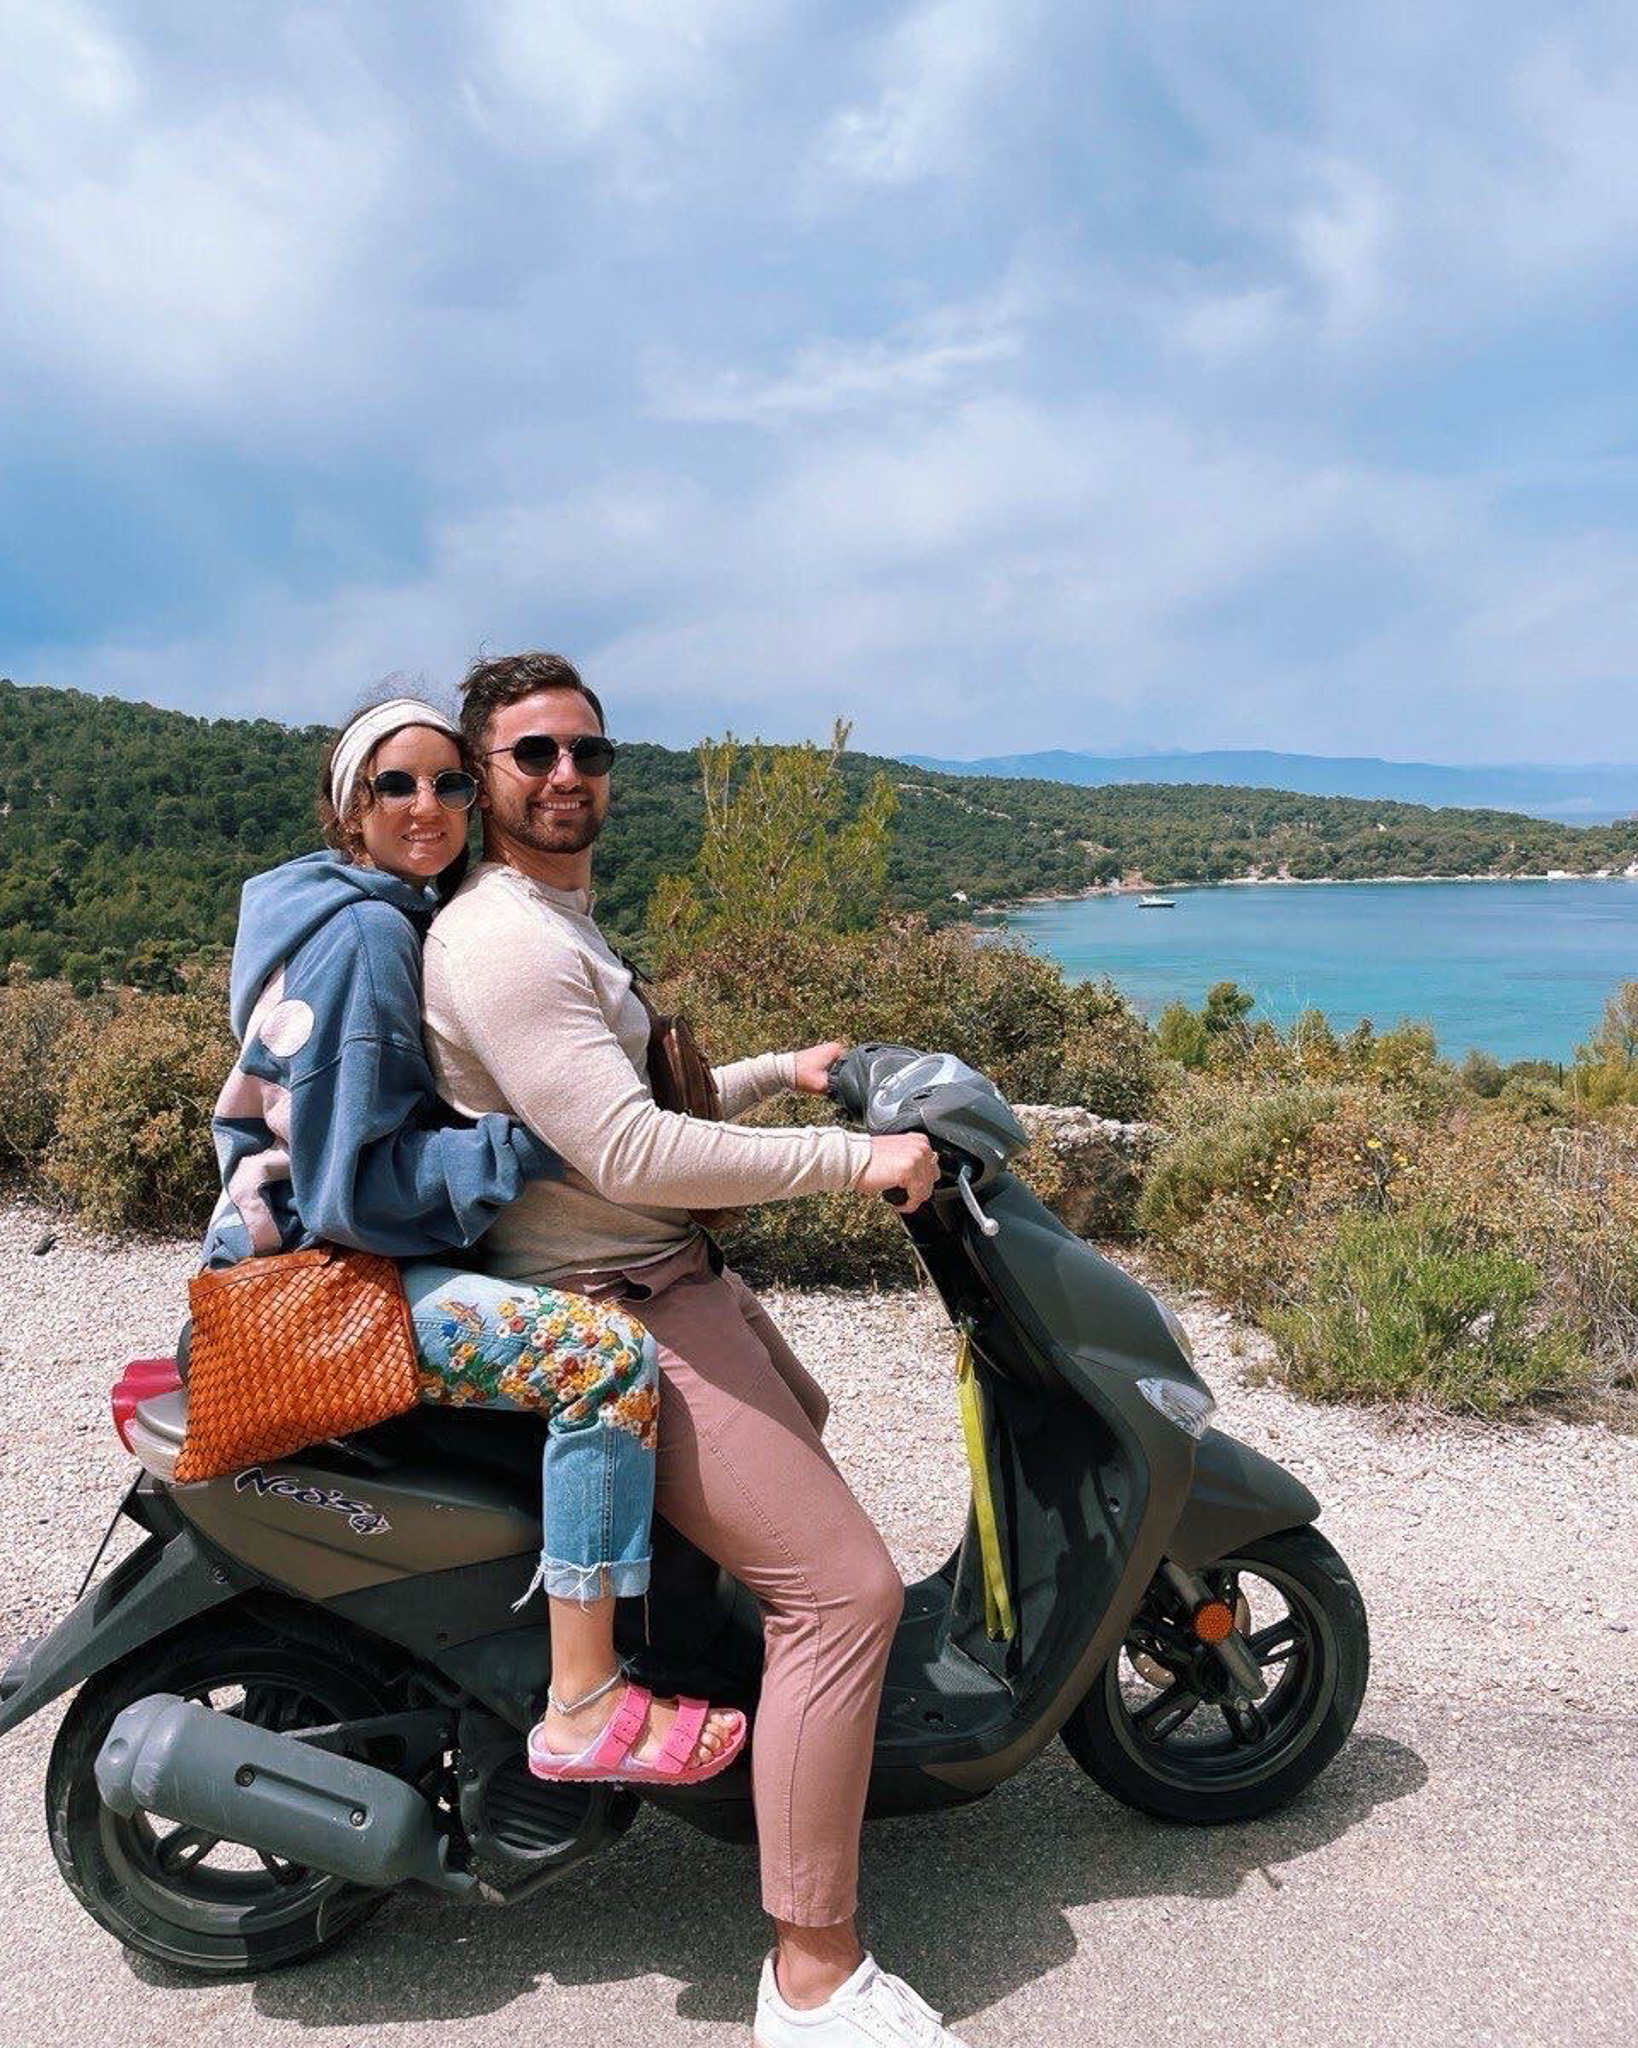 Dimitra Milan Dunn and Jake Dunn smiling as they ride mopeds on the island of Spetses, Greece